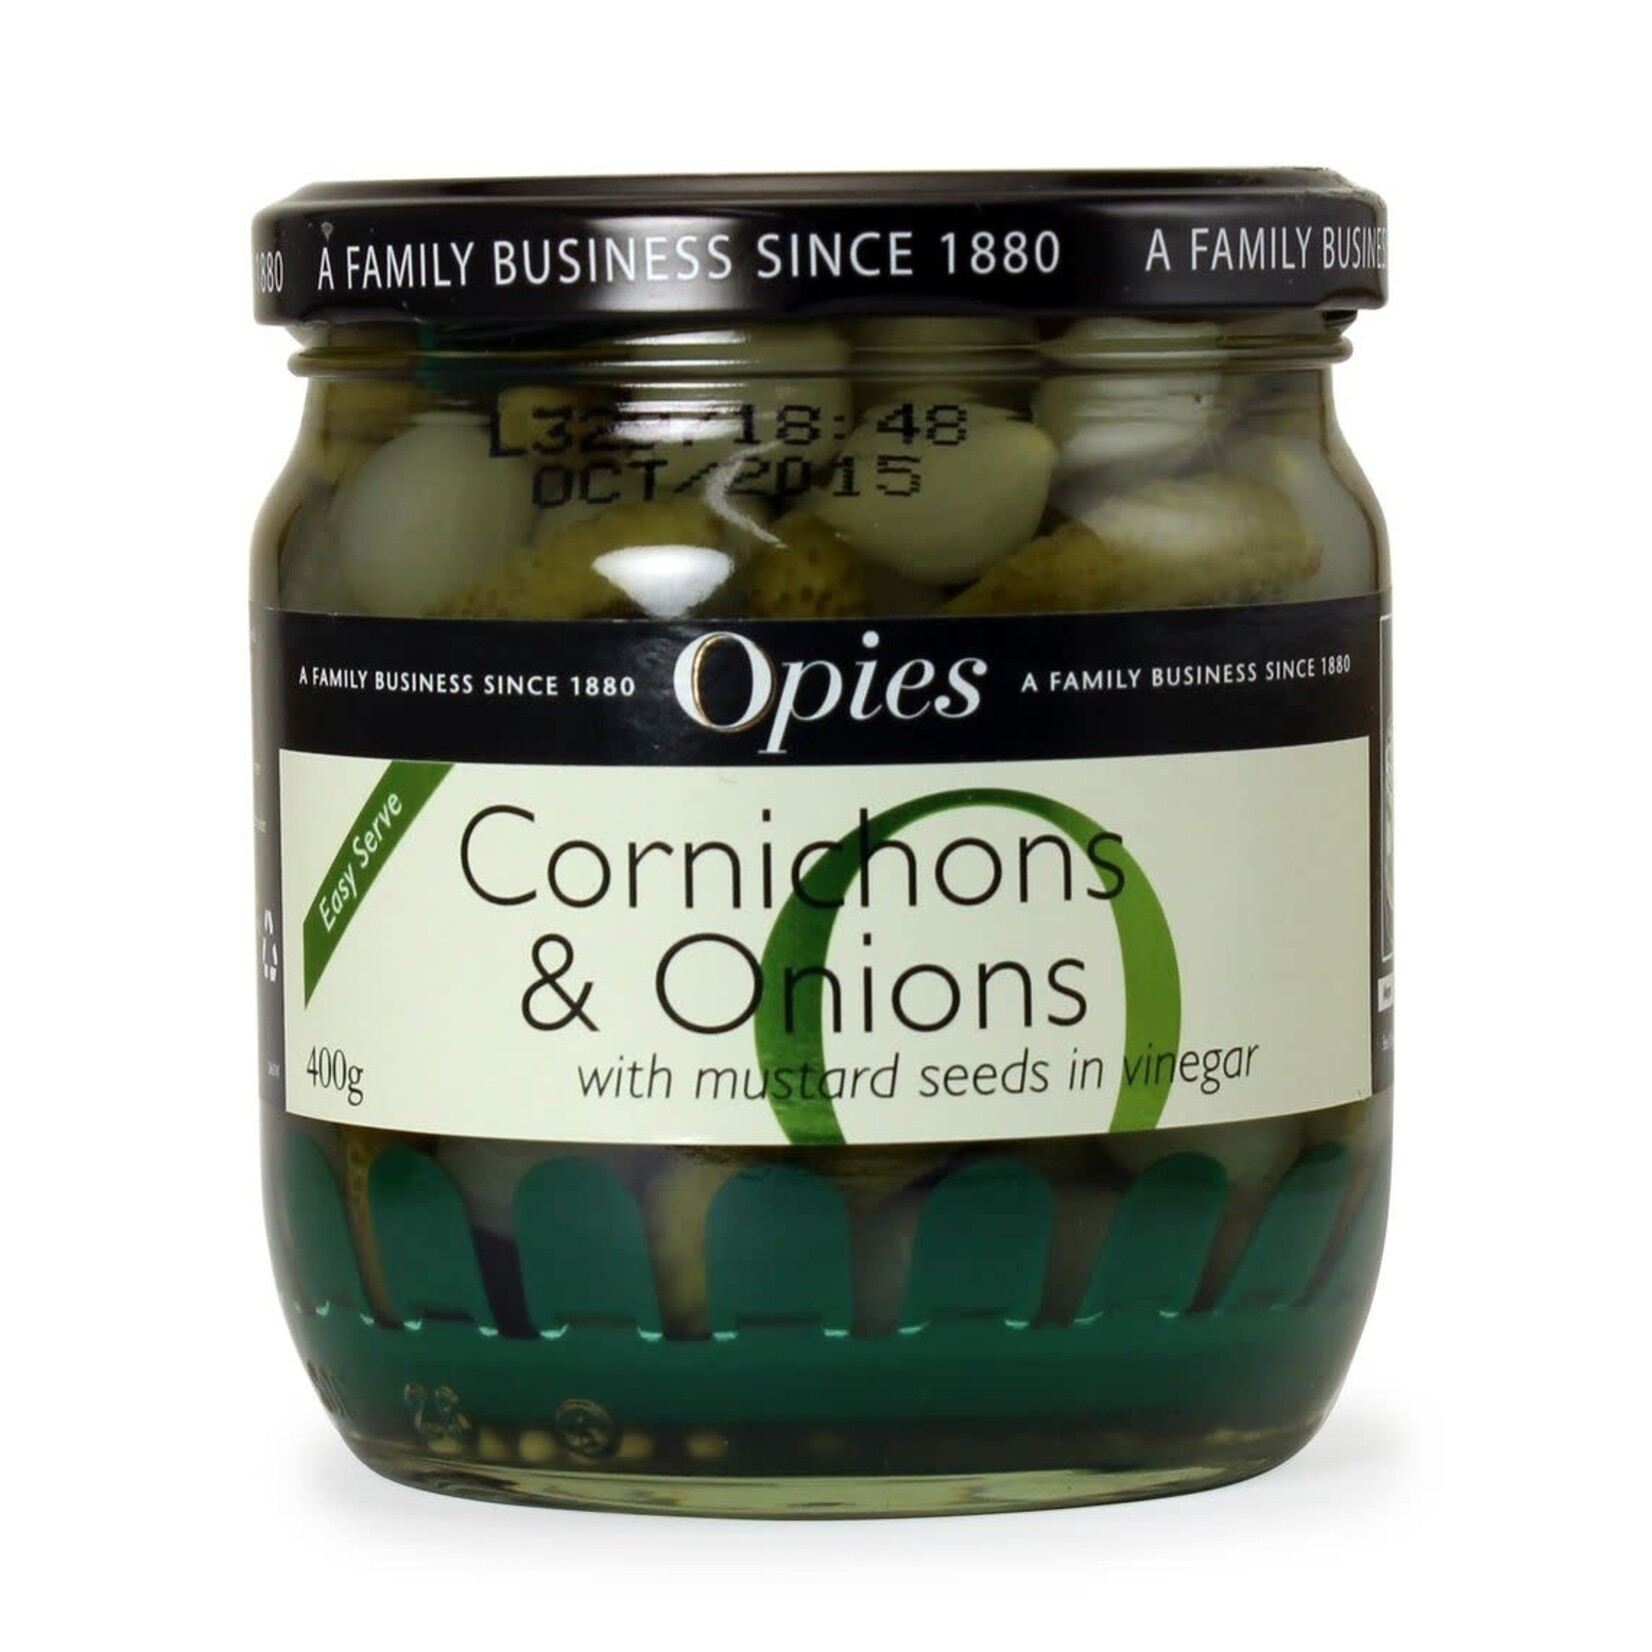 Opies Cornichons and Onions